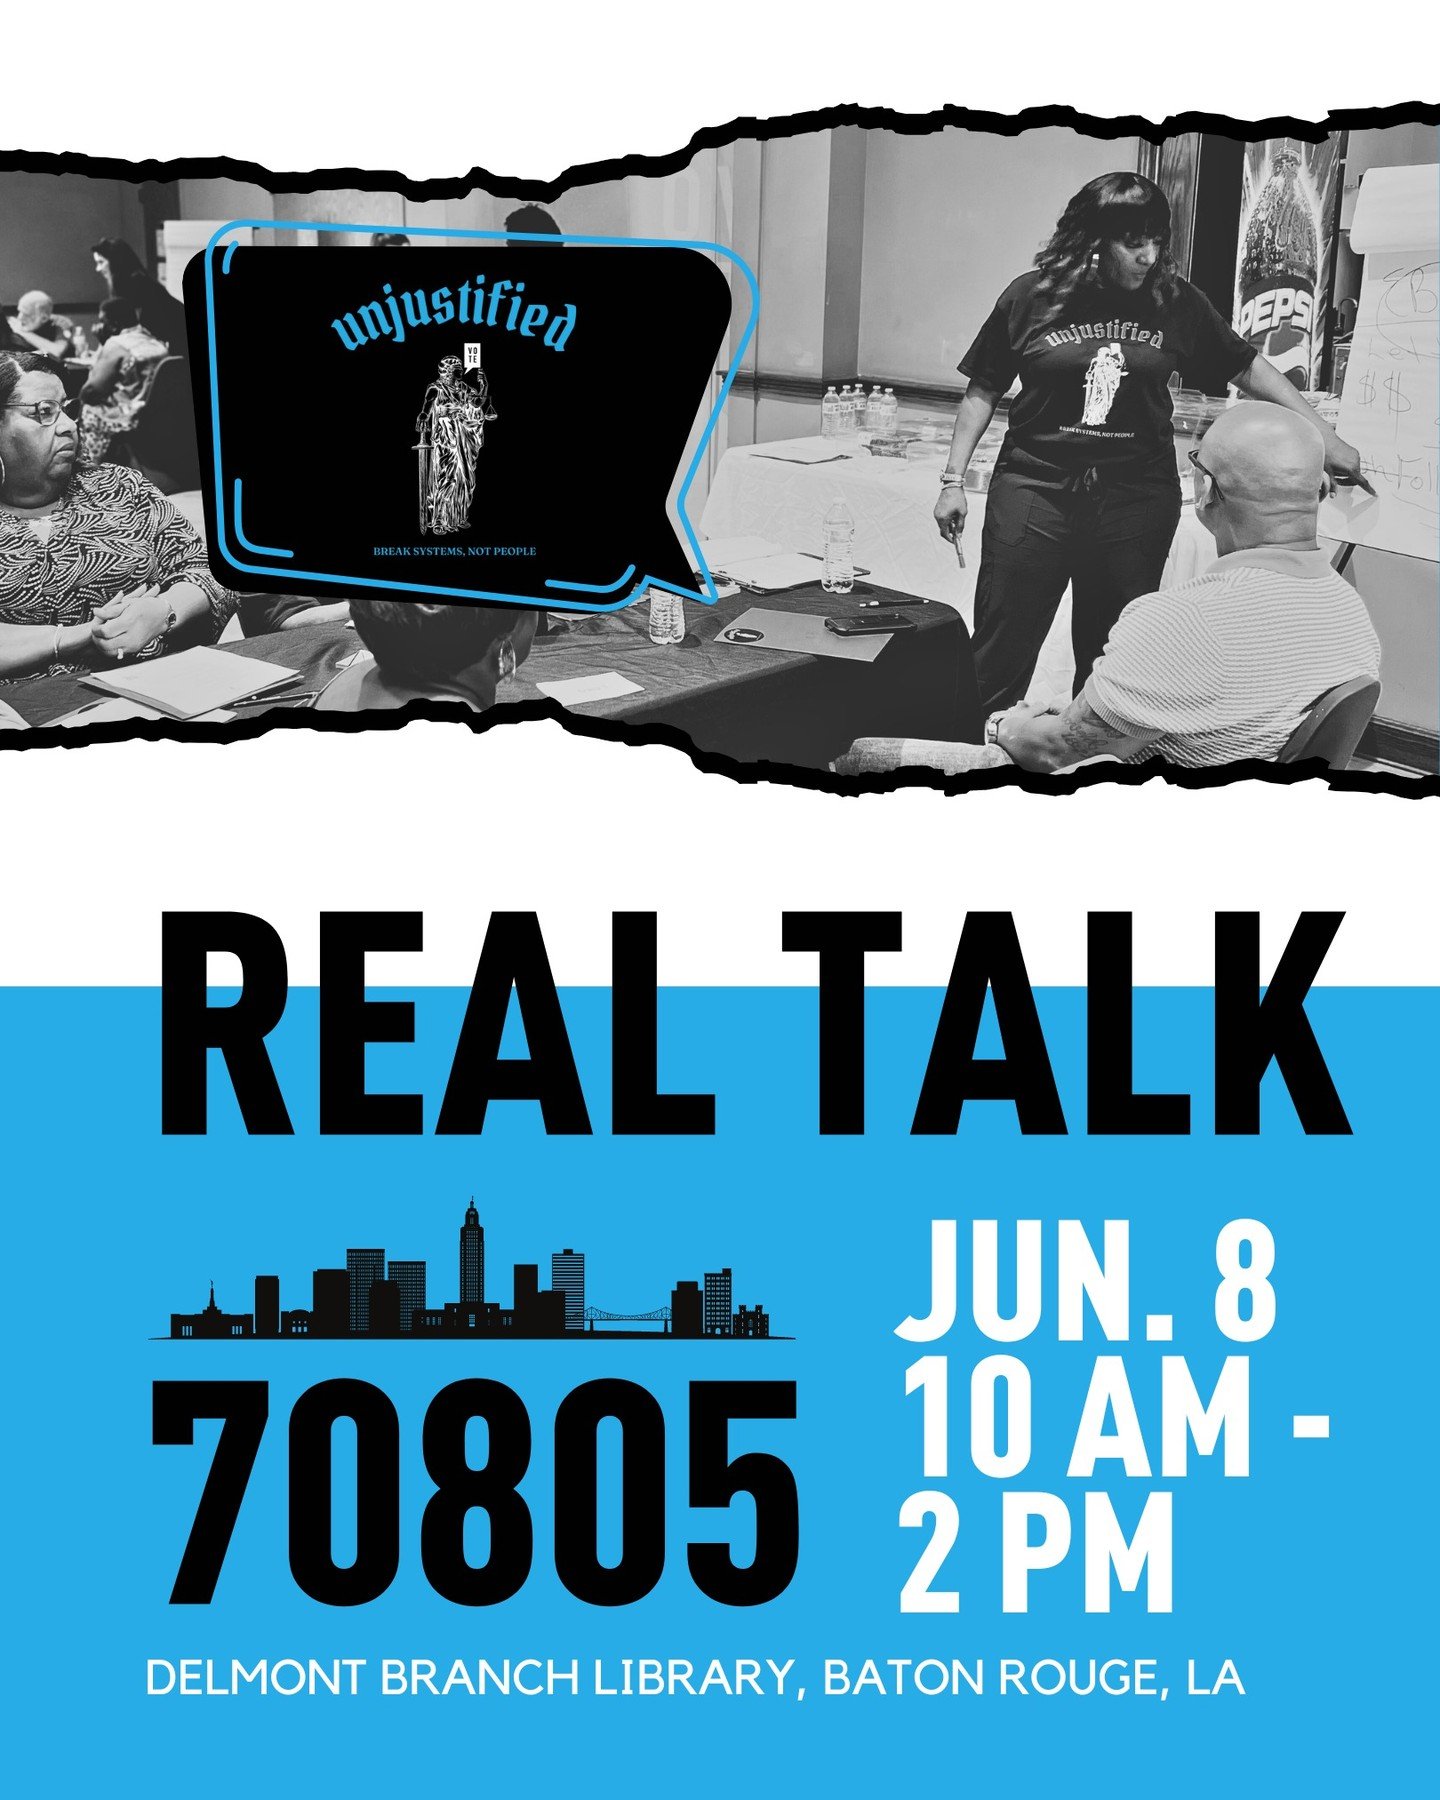 Join us for &ldquo;Real Talk 70805&rdquo;

📍 Delmont Branch Library 📅 Saturday, June 8 🕙 10am - 2pm

We'll discuss the impact of new bills, the harms our community faces and uncover the truth behind the tough-on-crime narrative that's masking the 